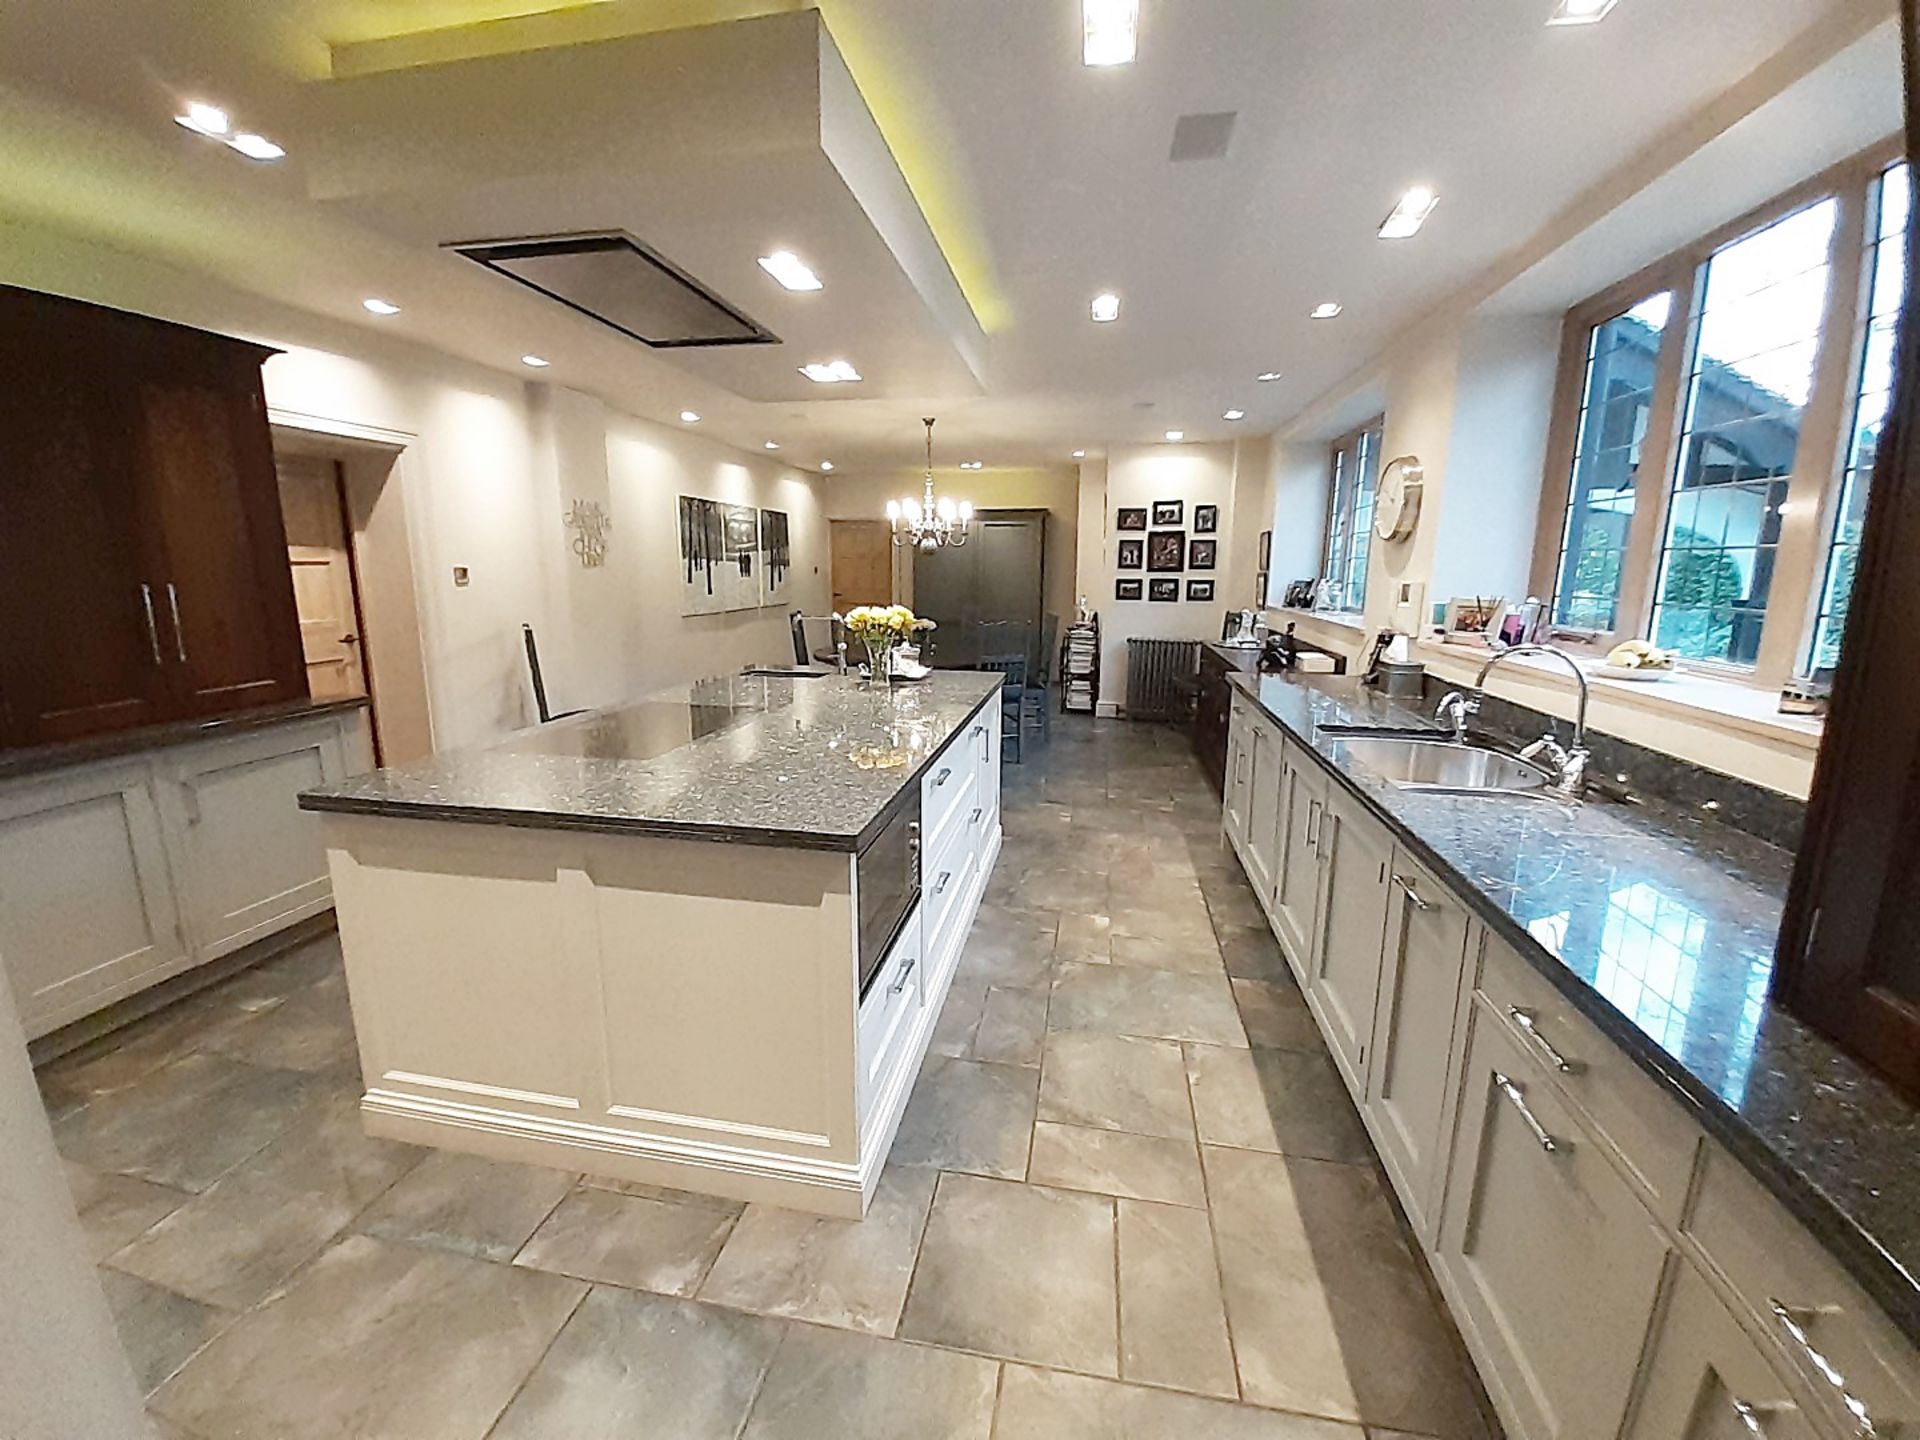 1 x Tom Howley Bespoke Solid Wood Kitchen Beautifully. Appointed With Granite Worktops - Image 5 of 138